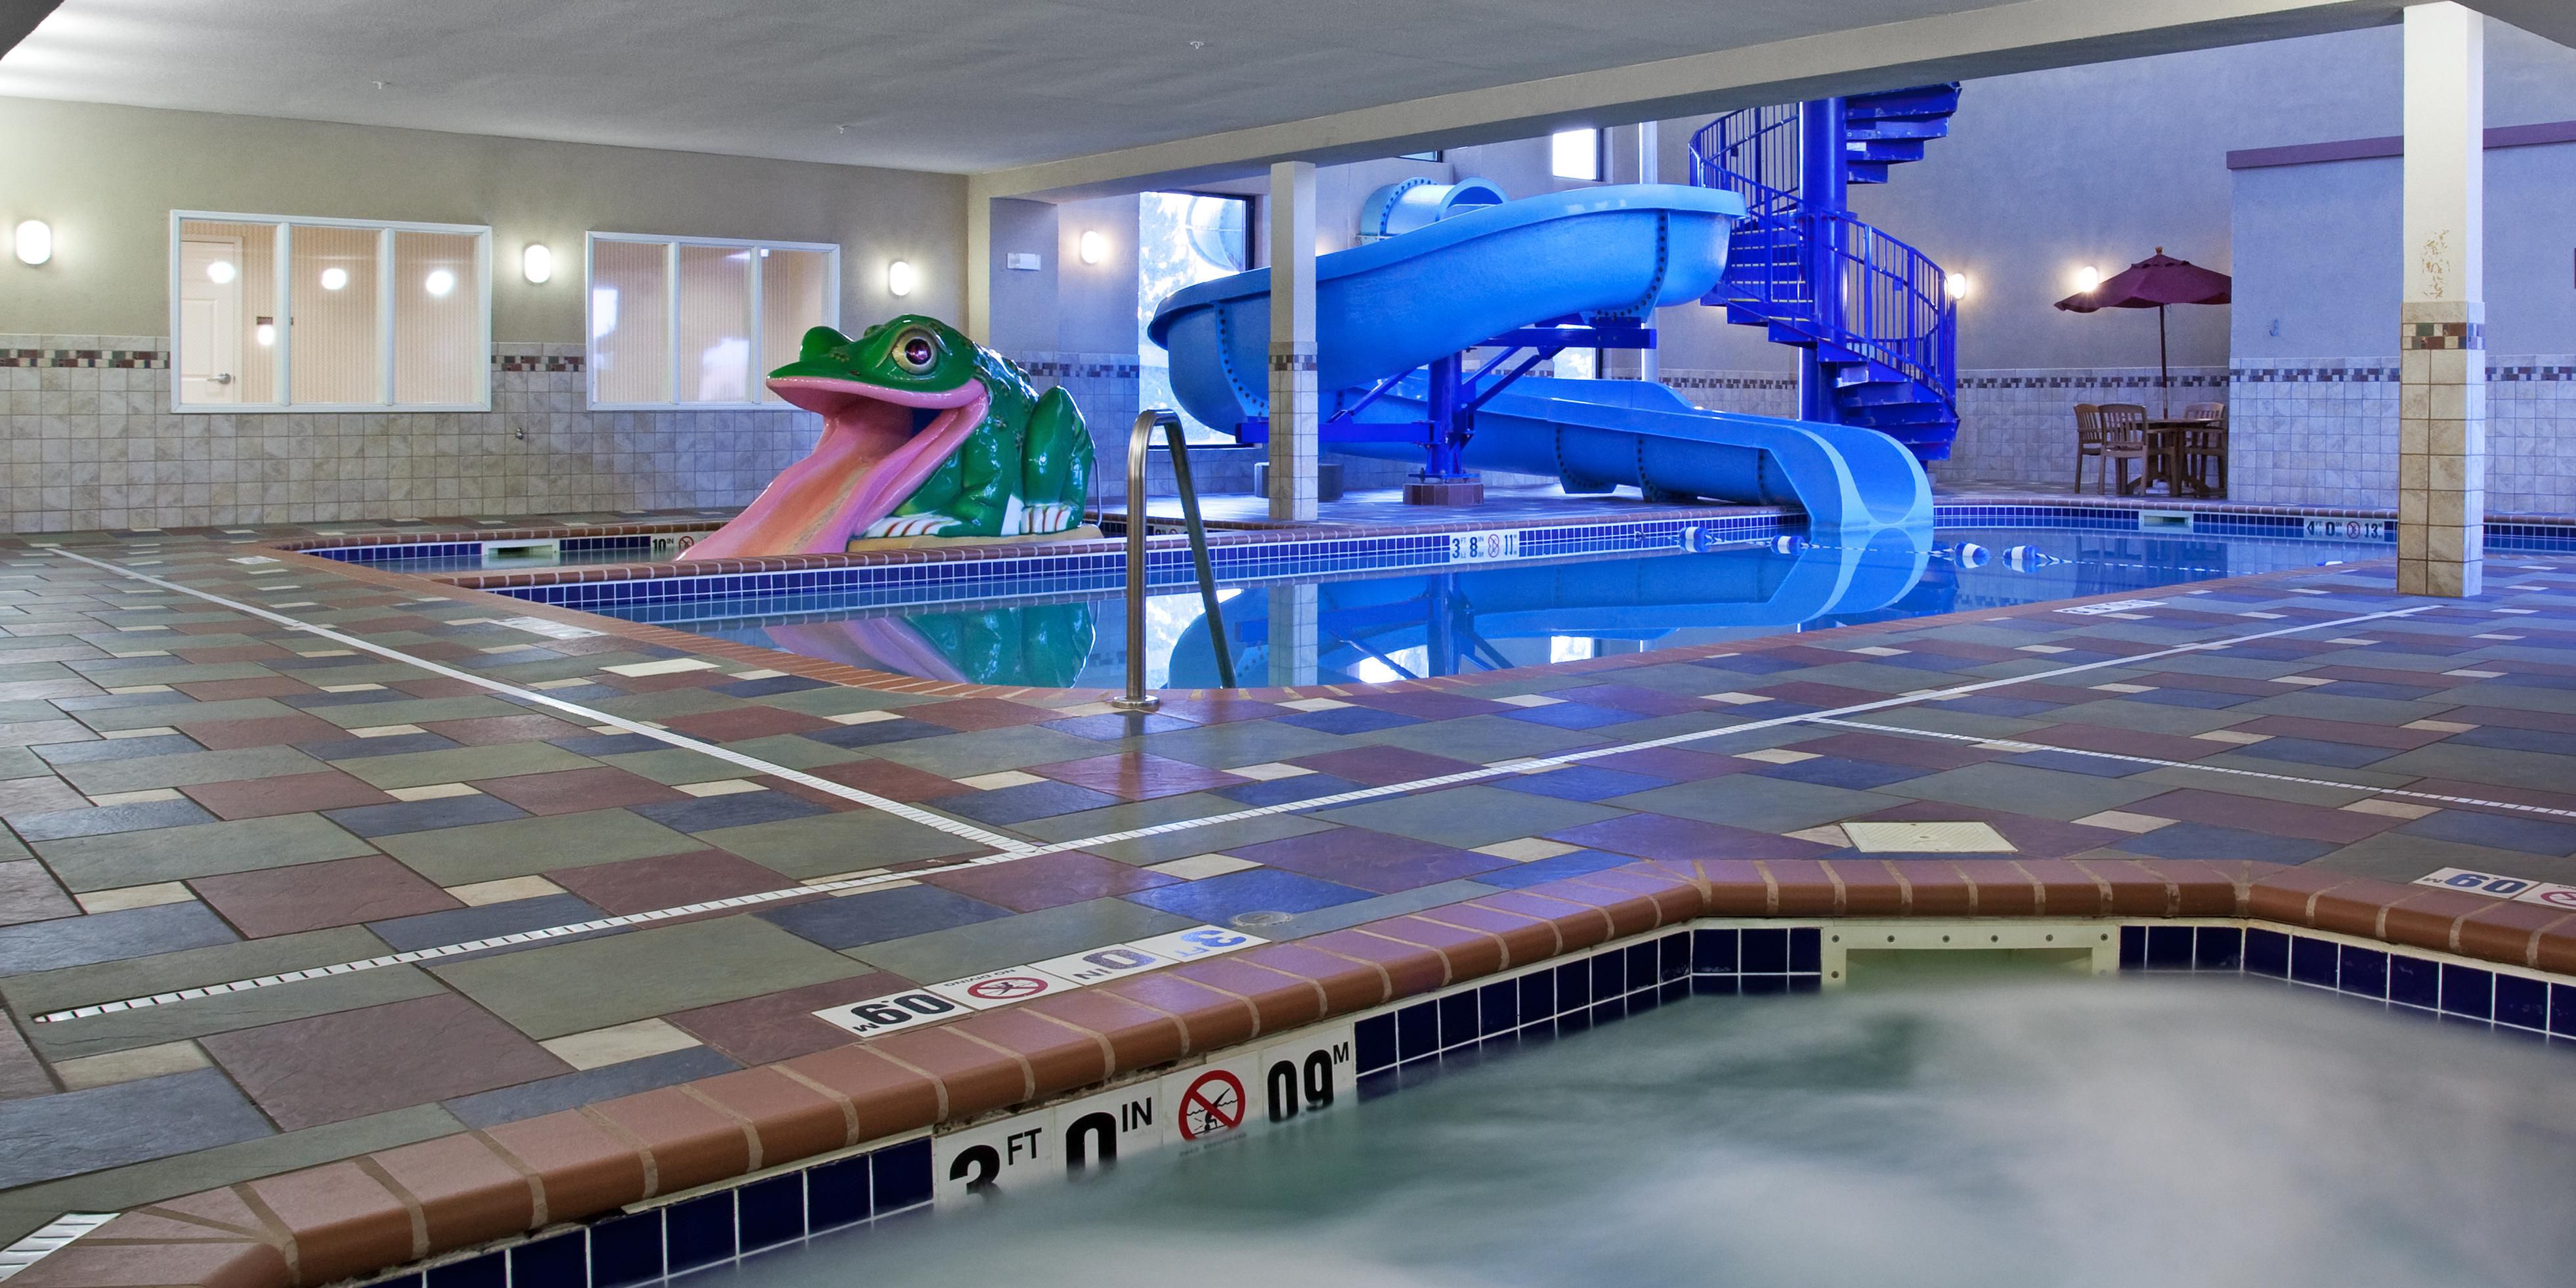 Our guests love our pool area! We have a waterpark-style slide, a kiddie pool with their own slide, a large swimming pool, and a separate hot tub. Something for the whole family! Book your stay with us and enjoy some great recreation without leaving the hotel. 